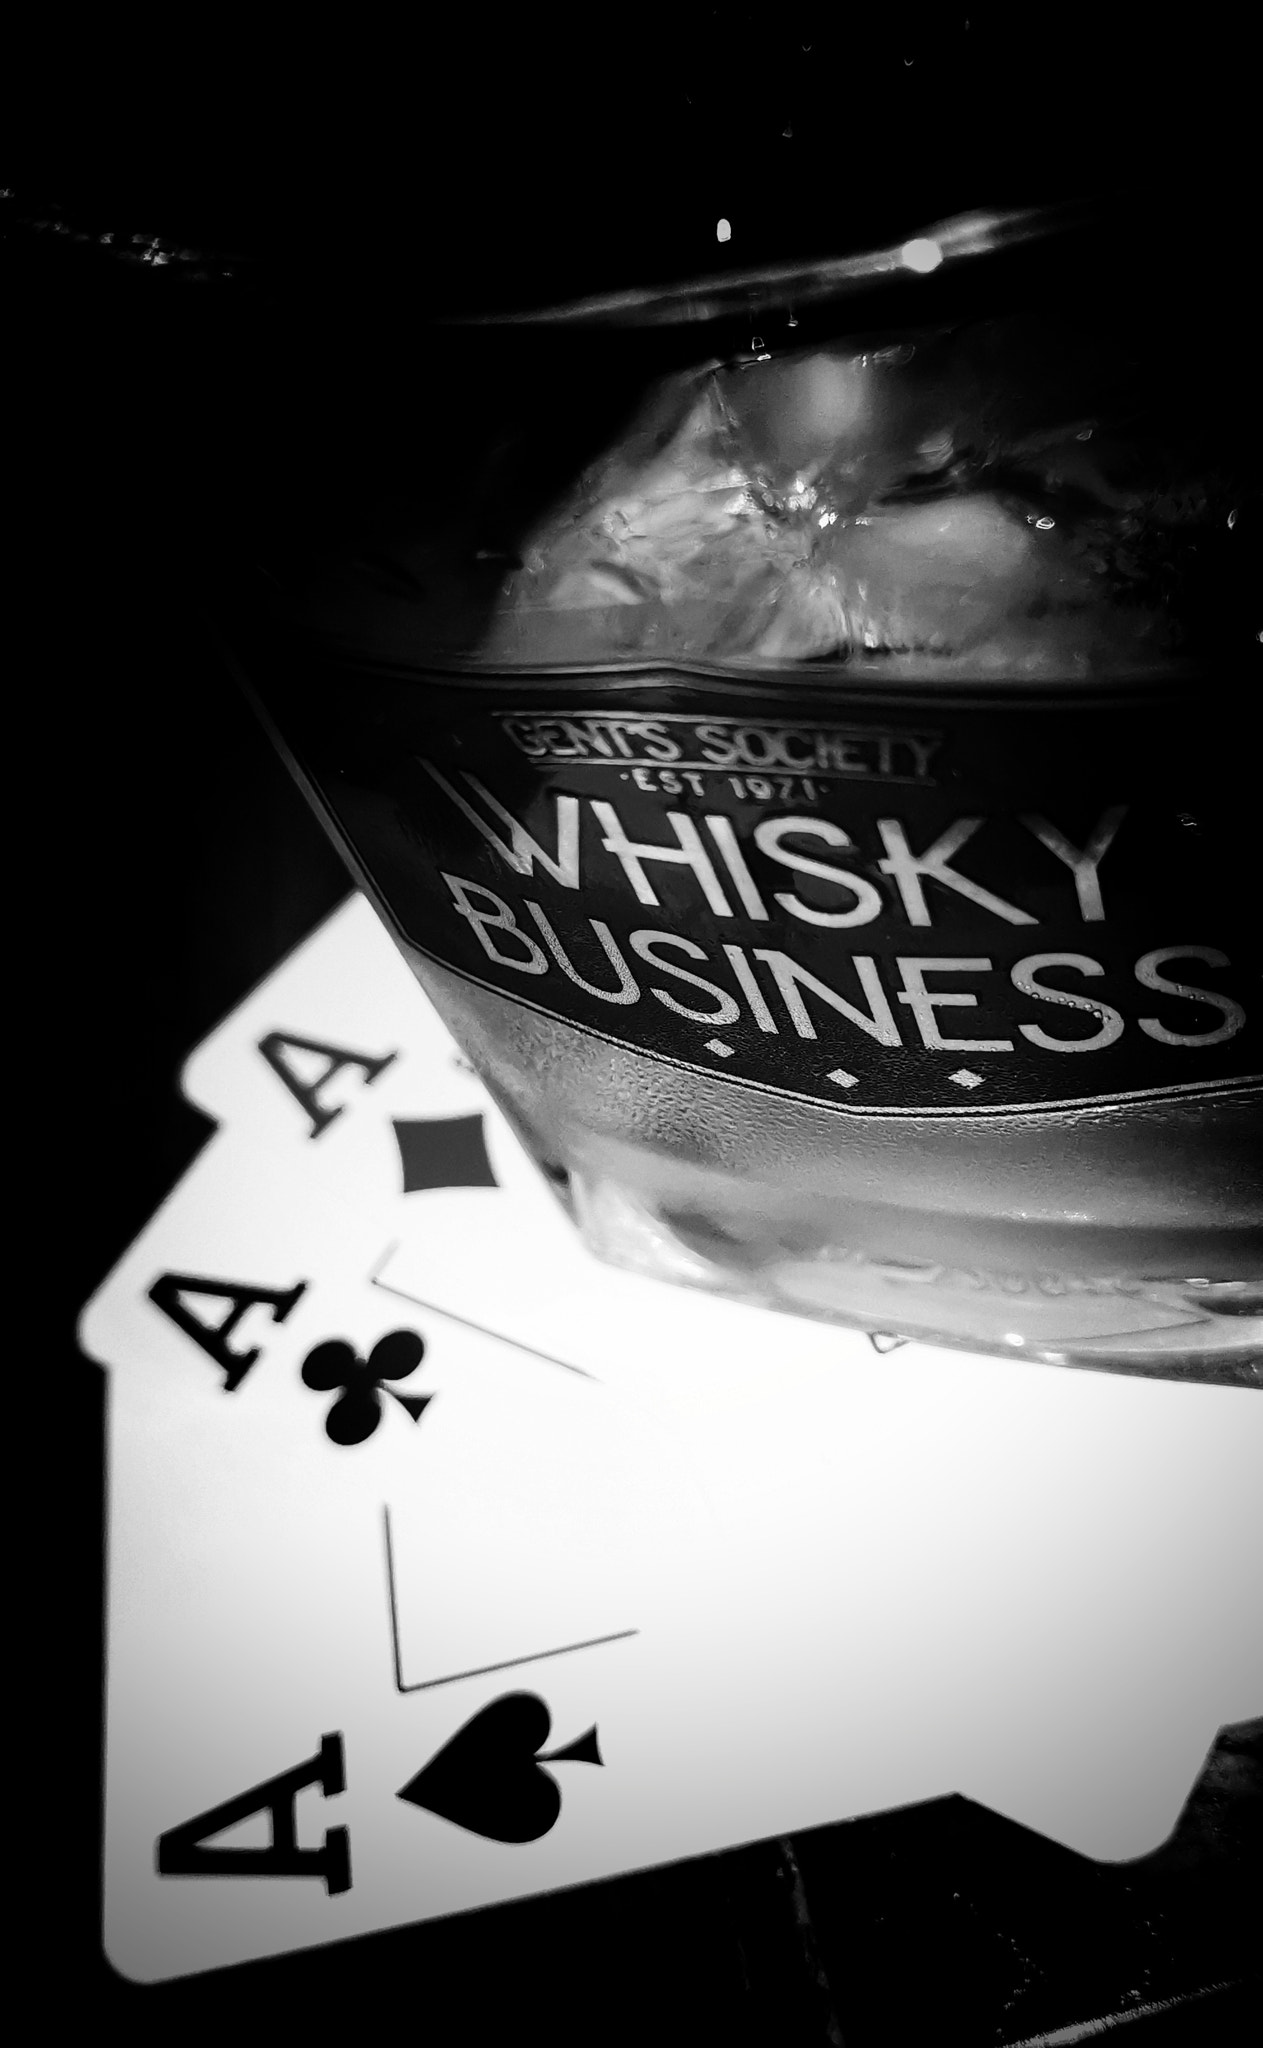 Whisky business